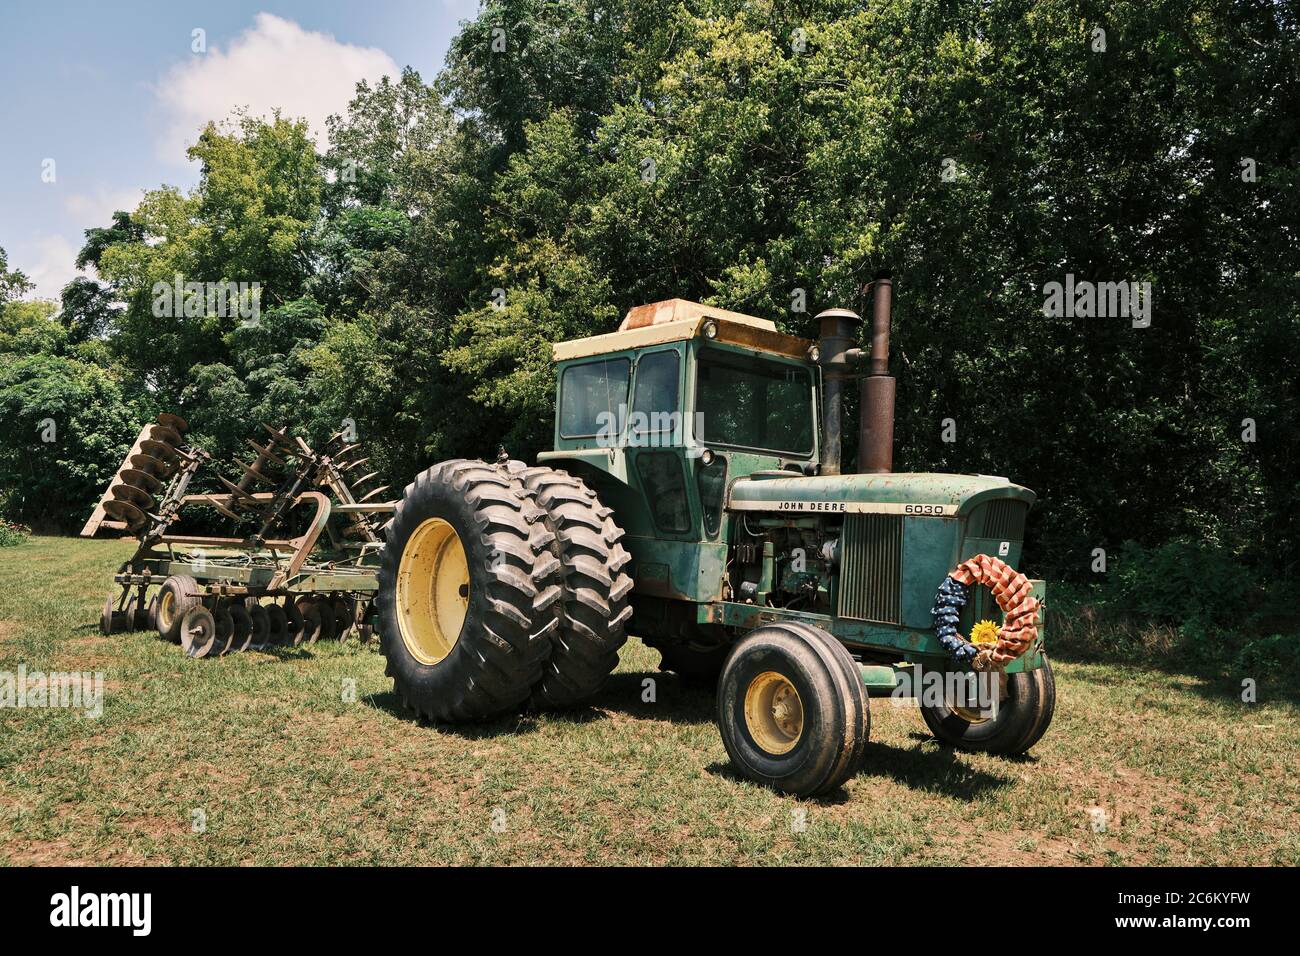 John Deere 6030 tractor built in the 1970s pulling a tiller rig for tilling farm fields in Alabama, USA. Stock Photo